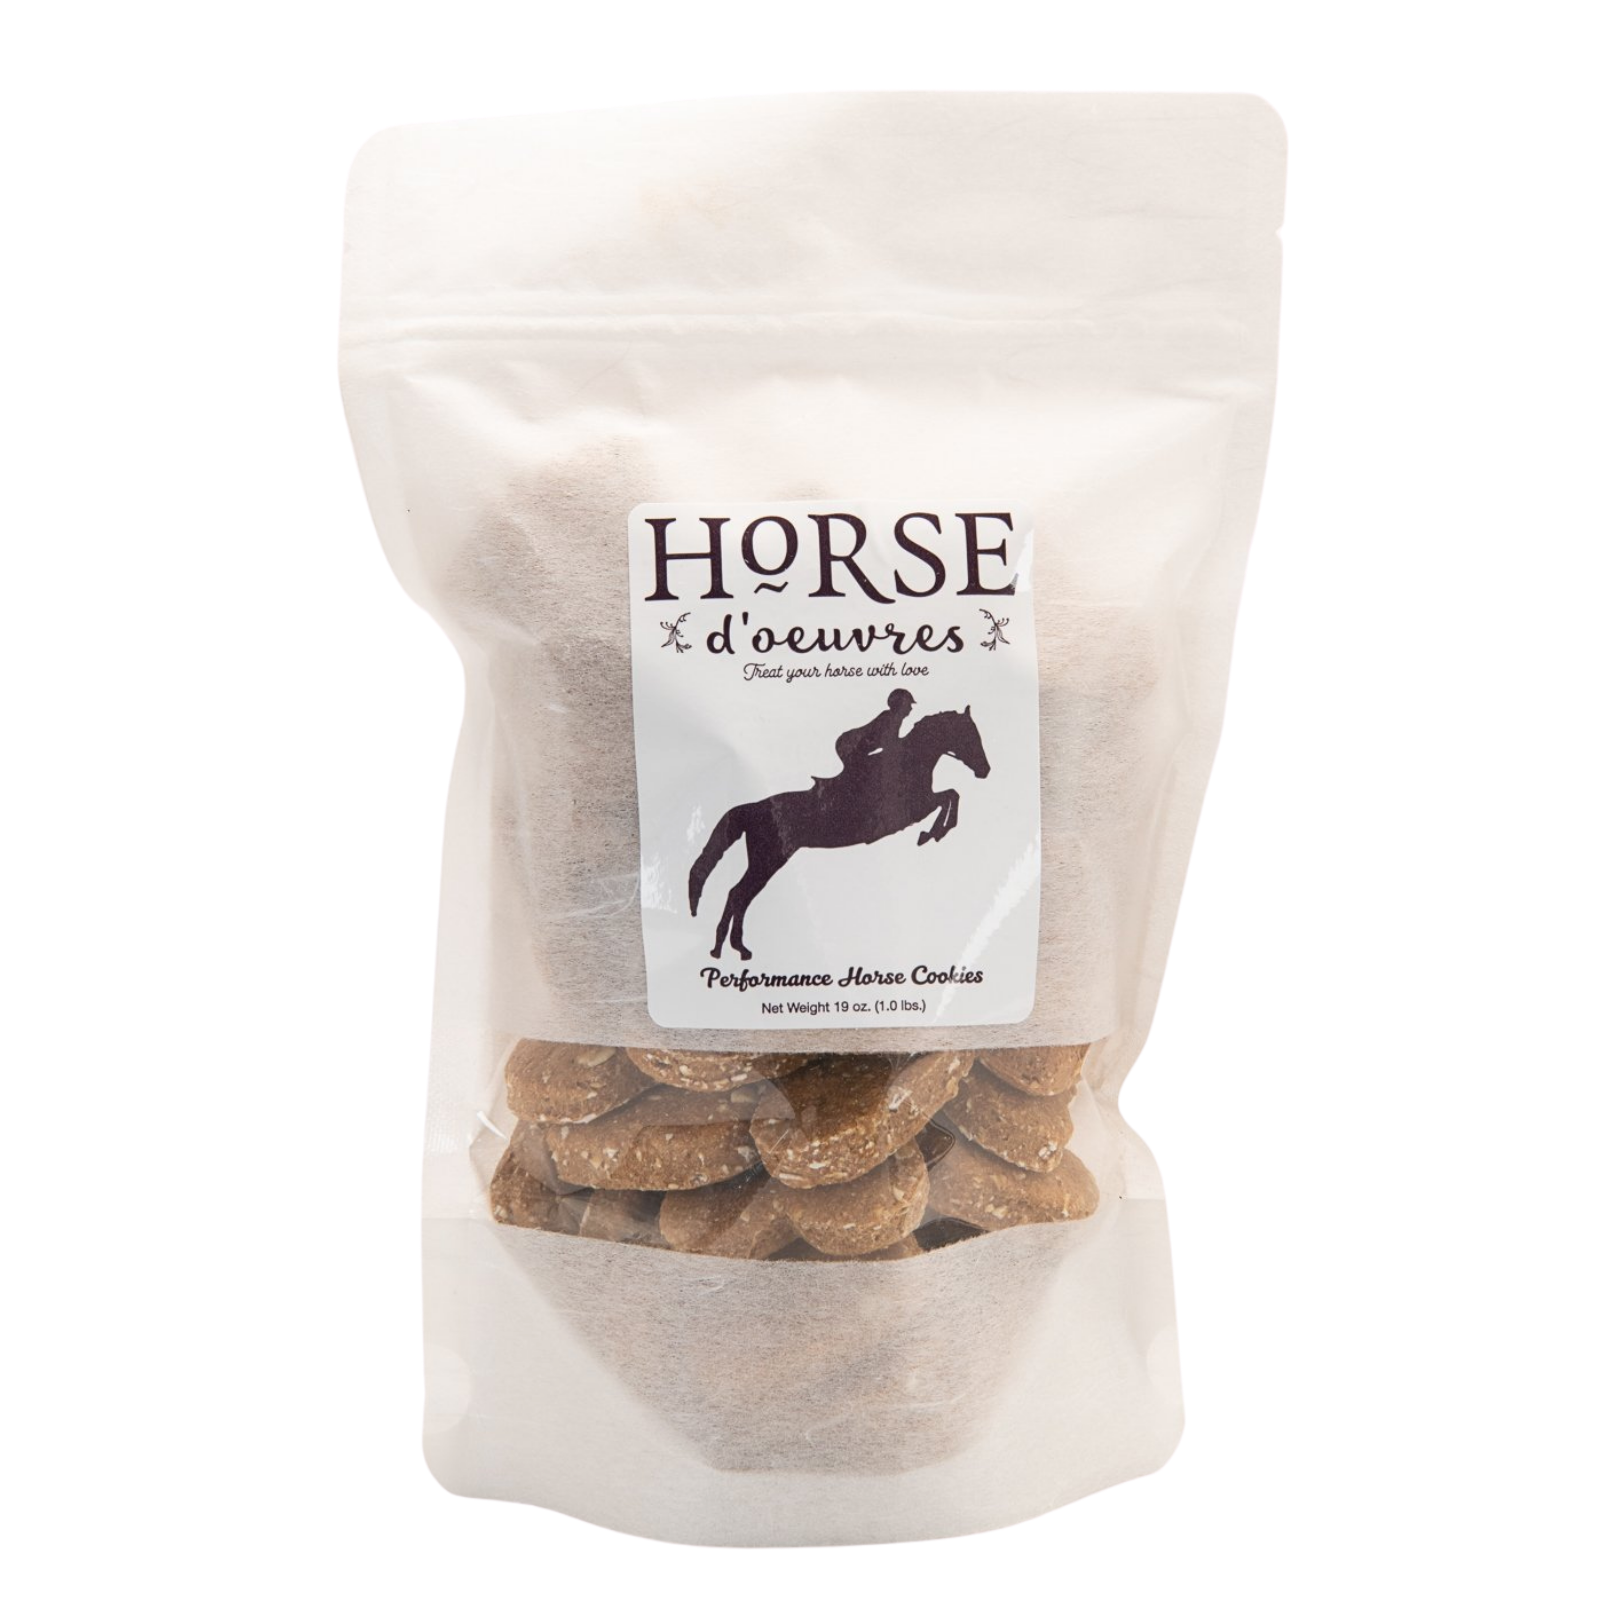 Horse d'oeuvres Horse Treats - Small Bag